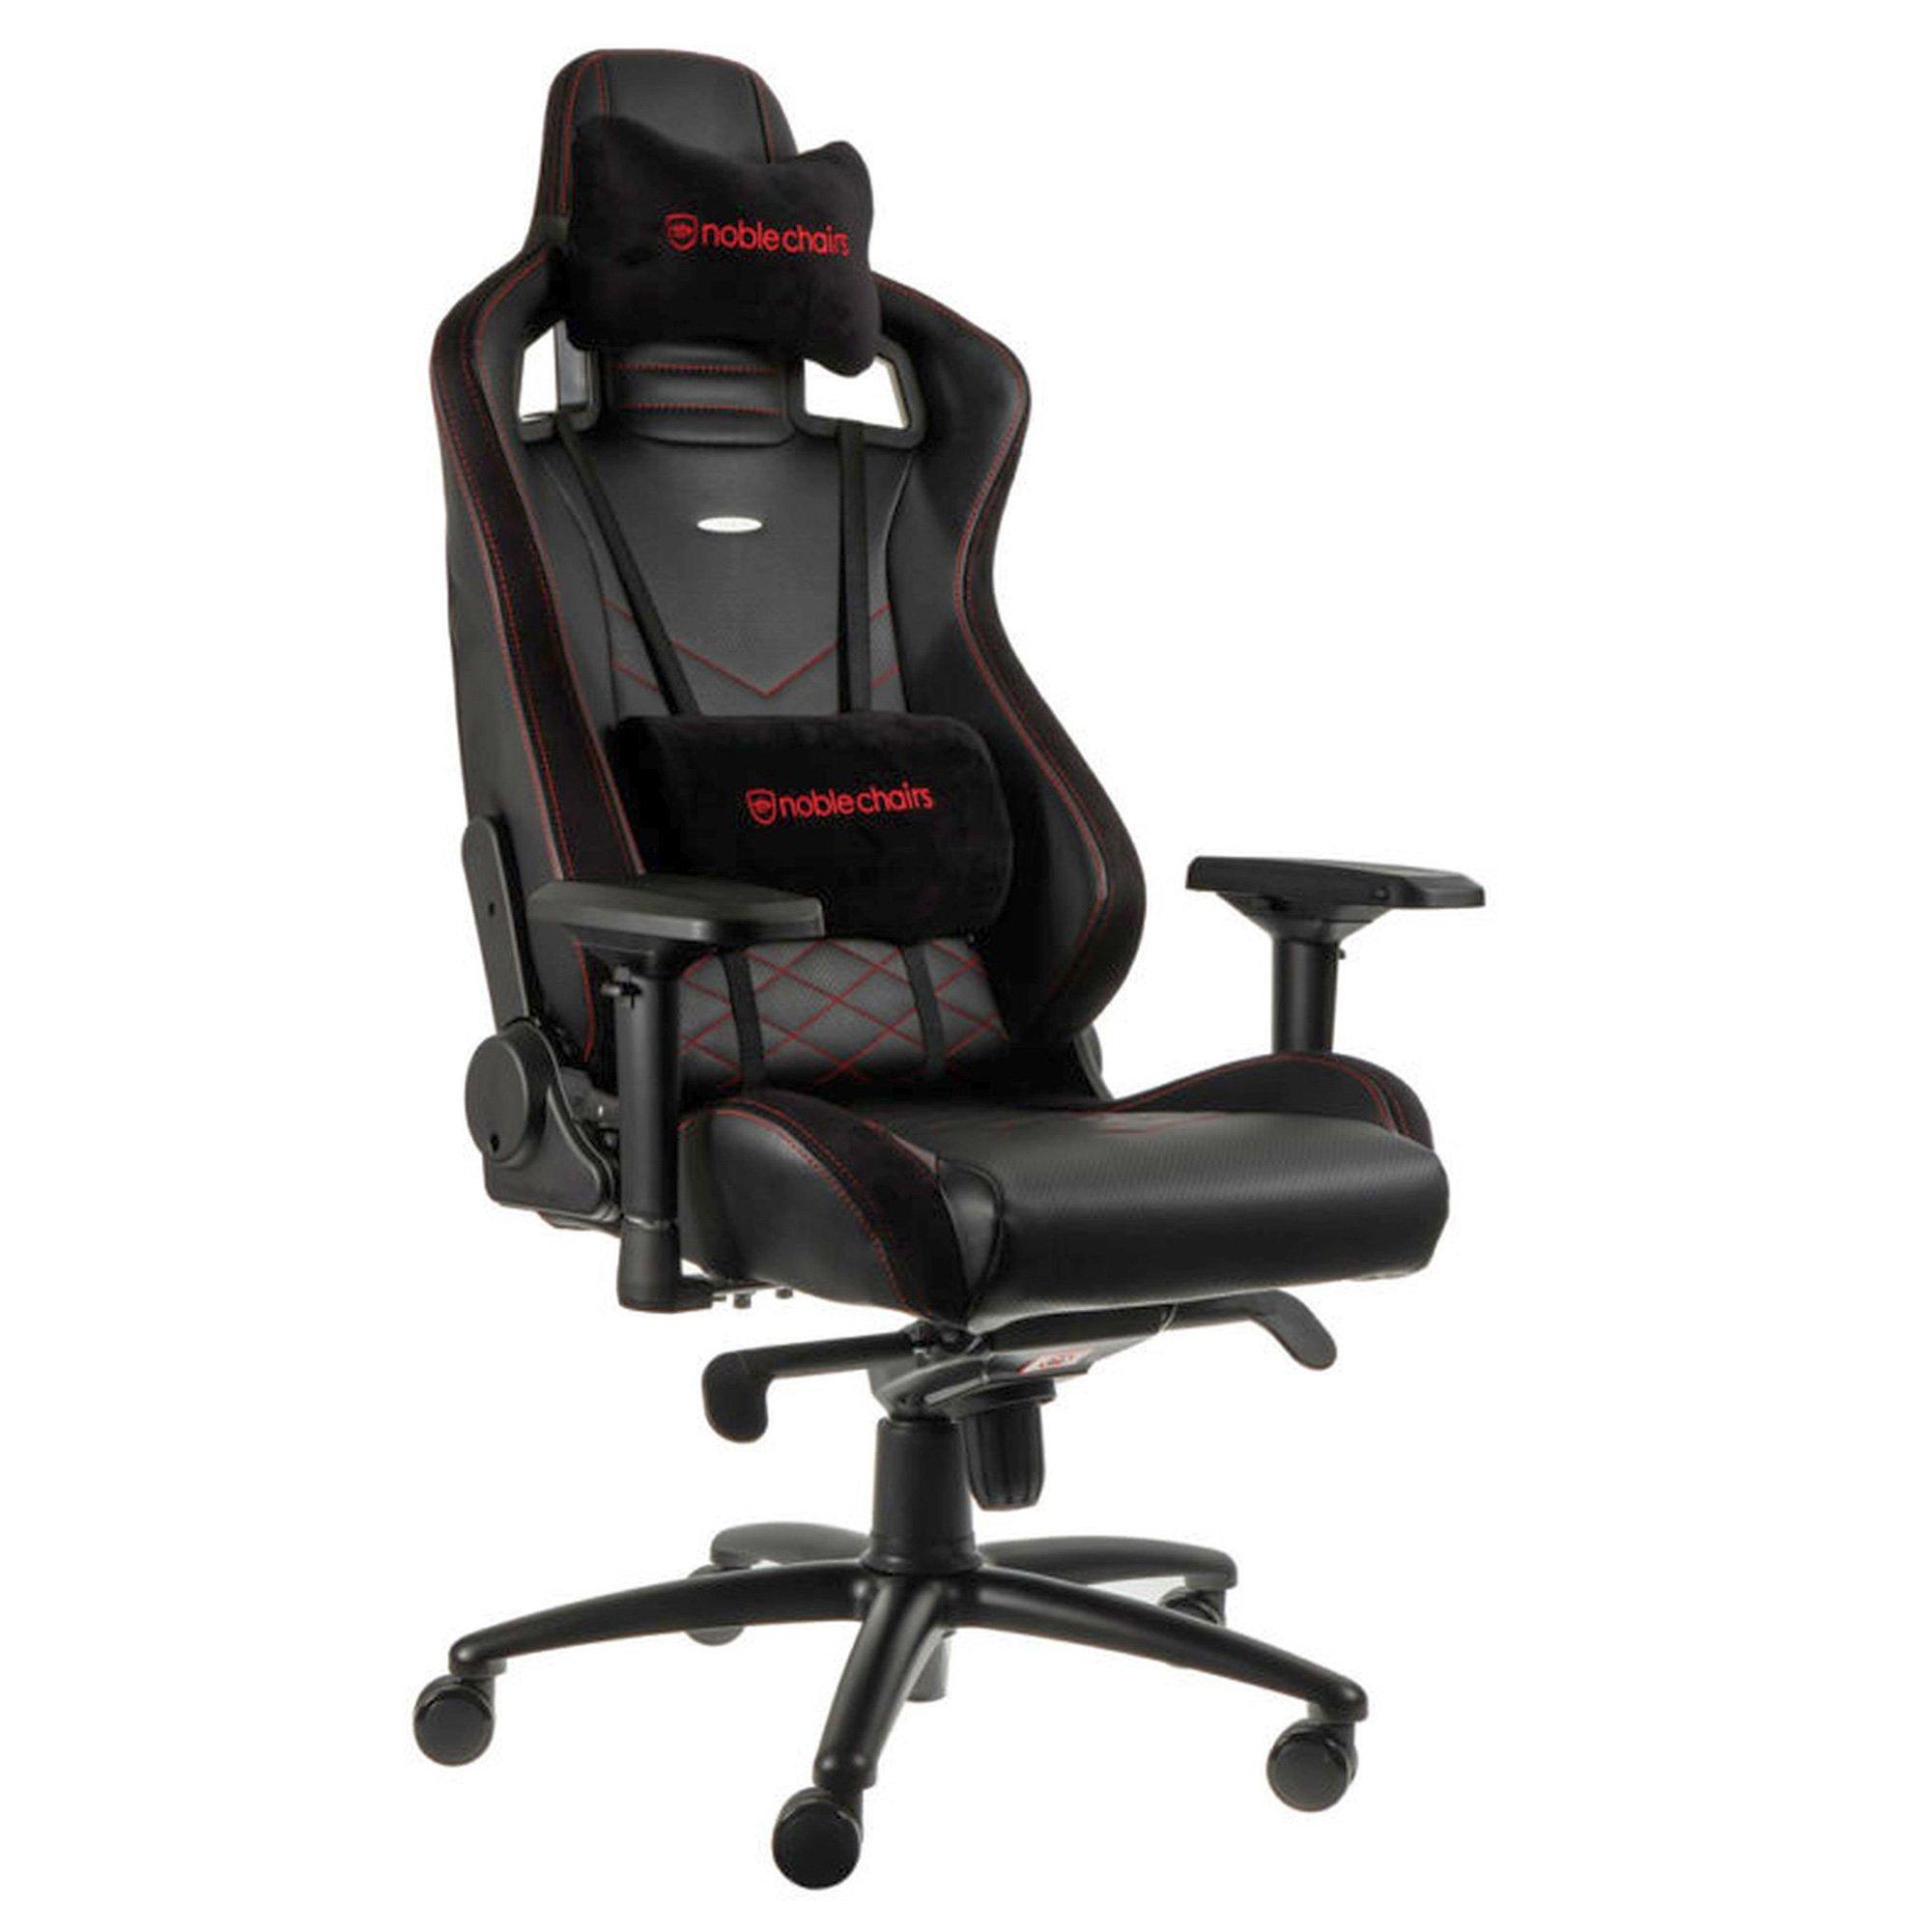 Image of noblechairs EPIC Gaming Chair Gaming-Stuhl